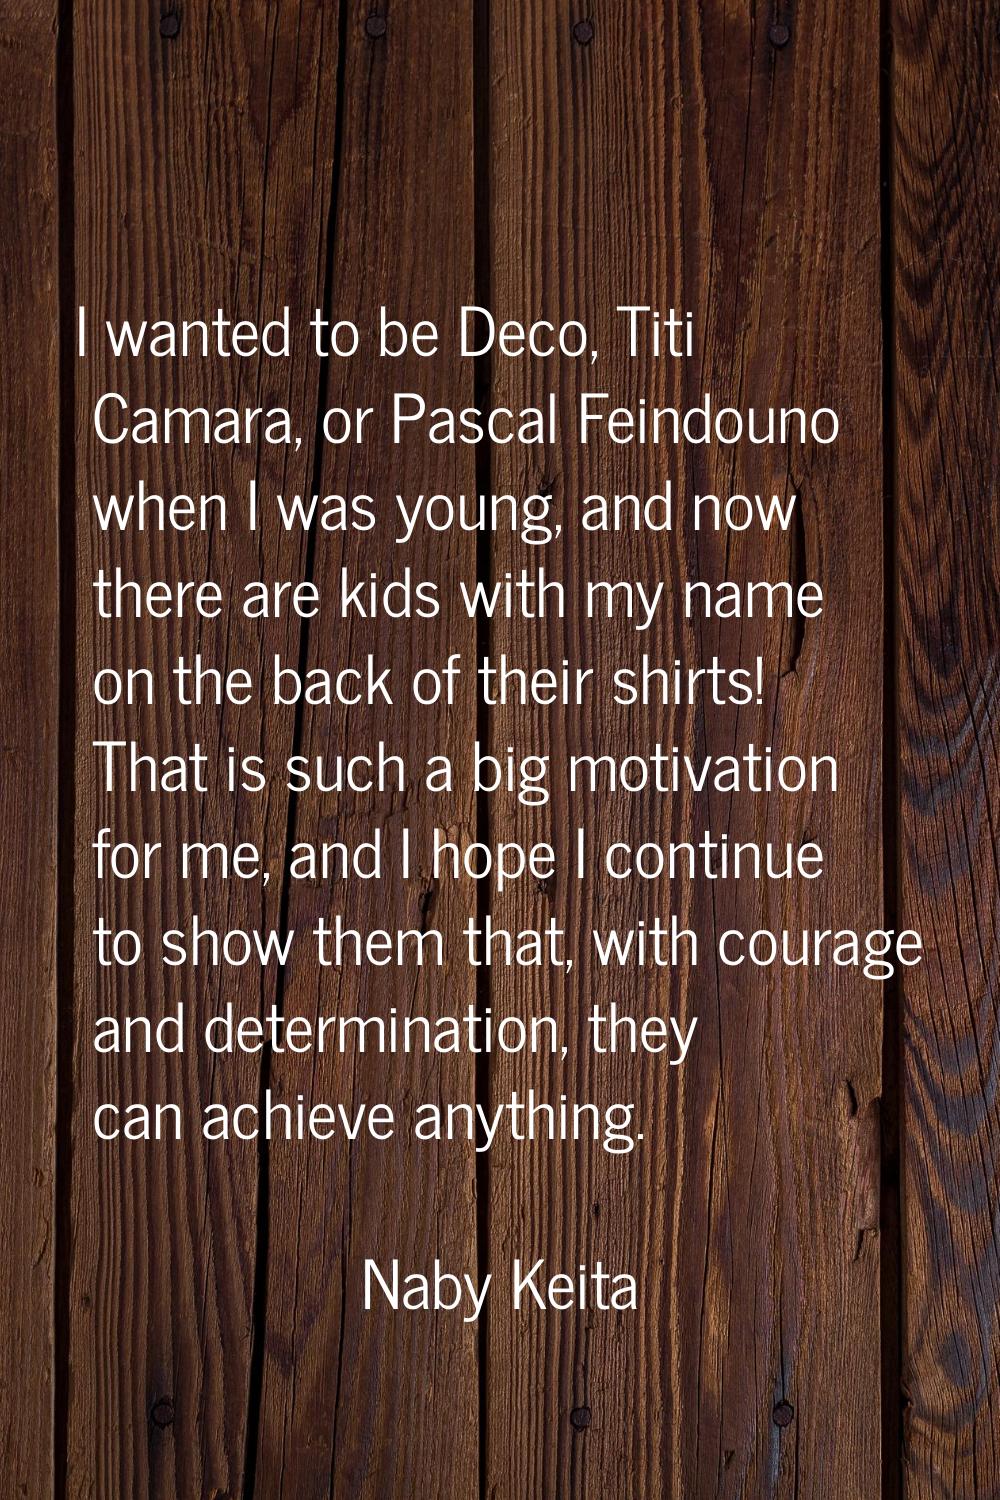 I wanted to be Deco, Titi Camara, or Pascal Feindouno when I was young, and now there are kids with